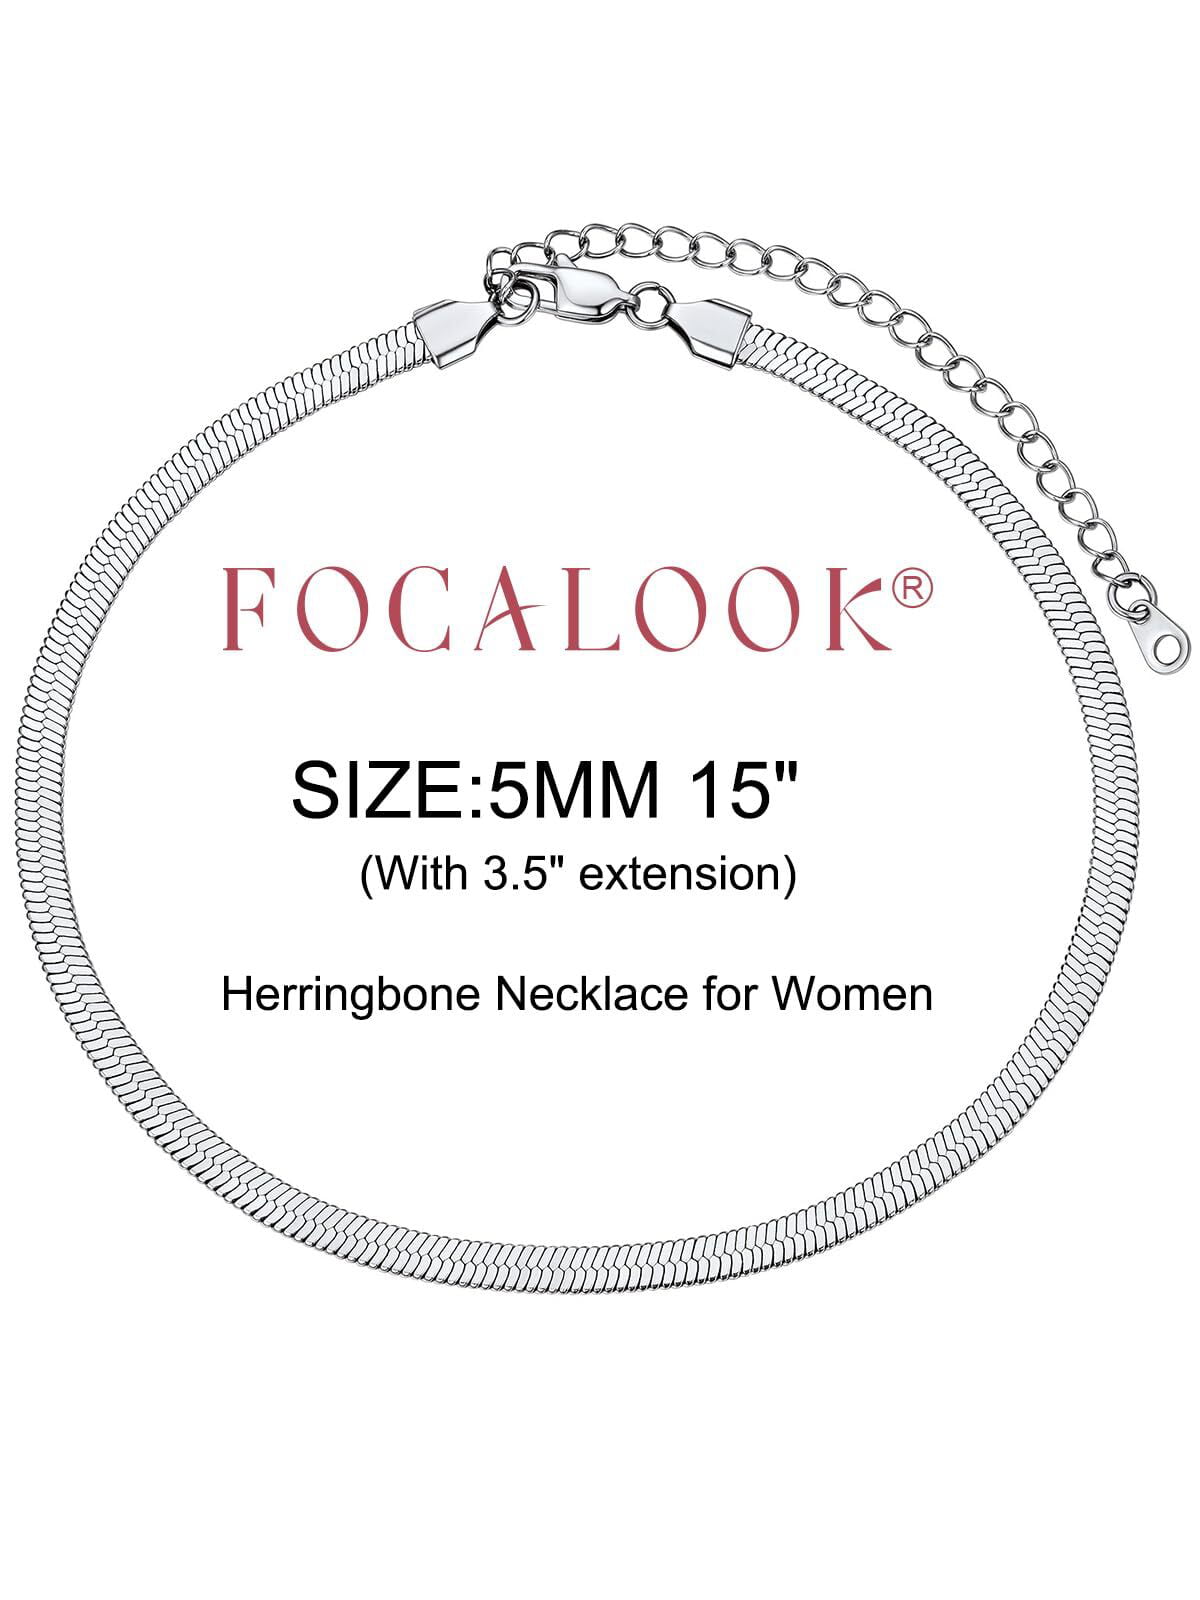 FOCALOOK Flat Snake Chain Stainless Steel Herringbone Necklace for Women Gold 5mm 12 Inches, Adult Unisex, Size: 5mm Width